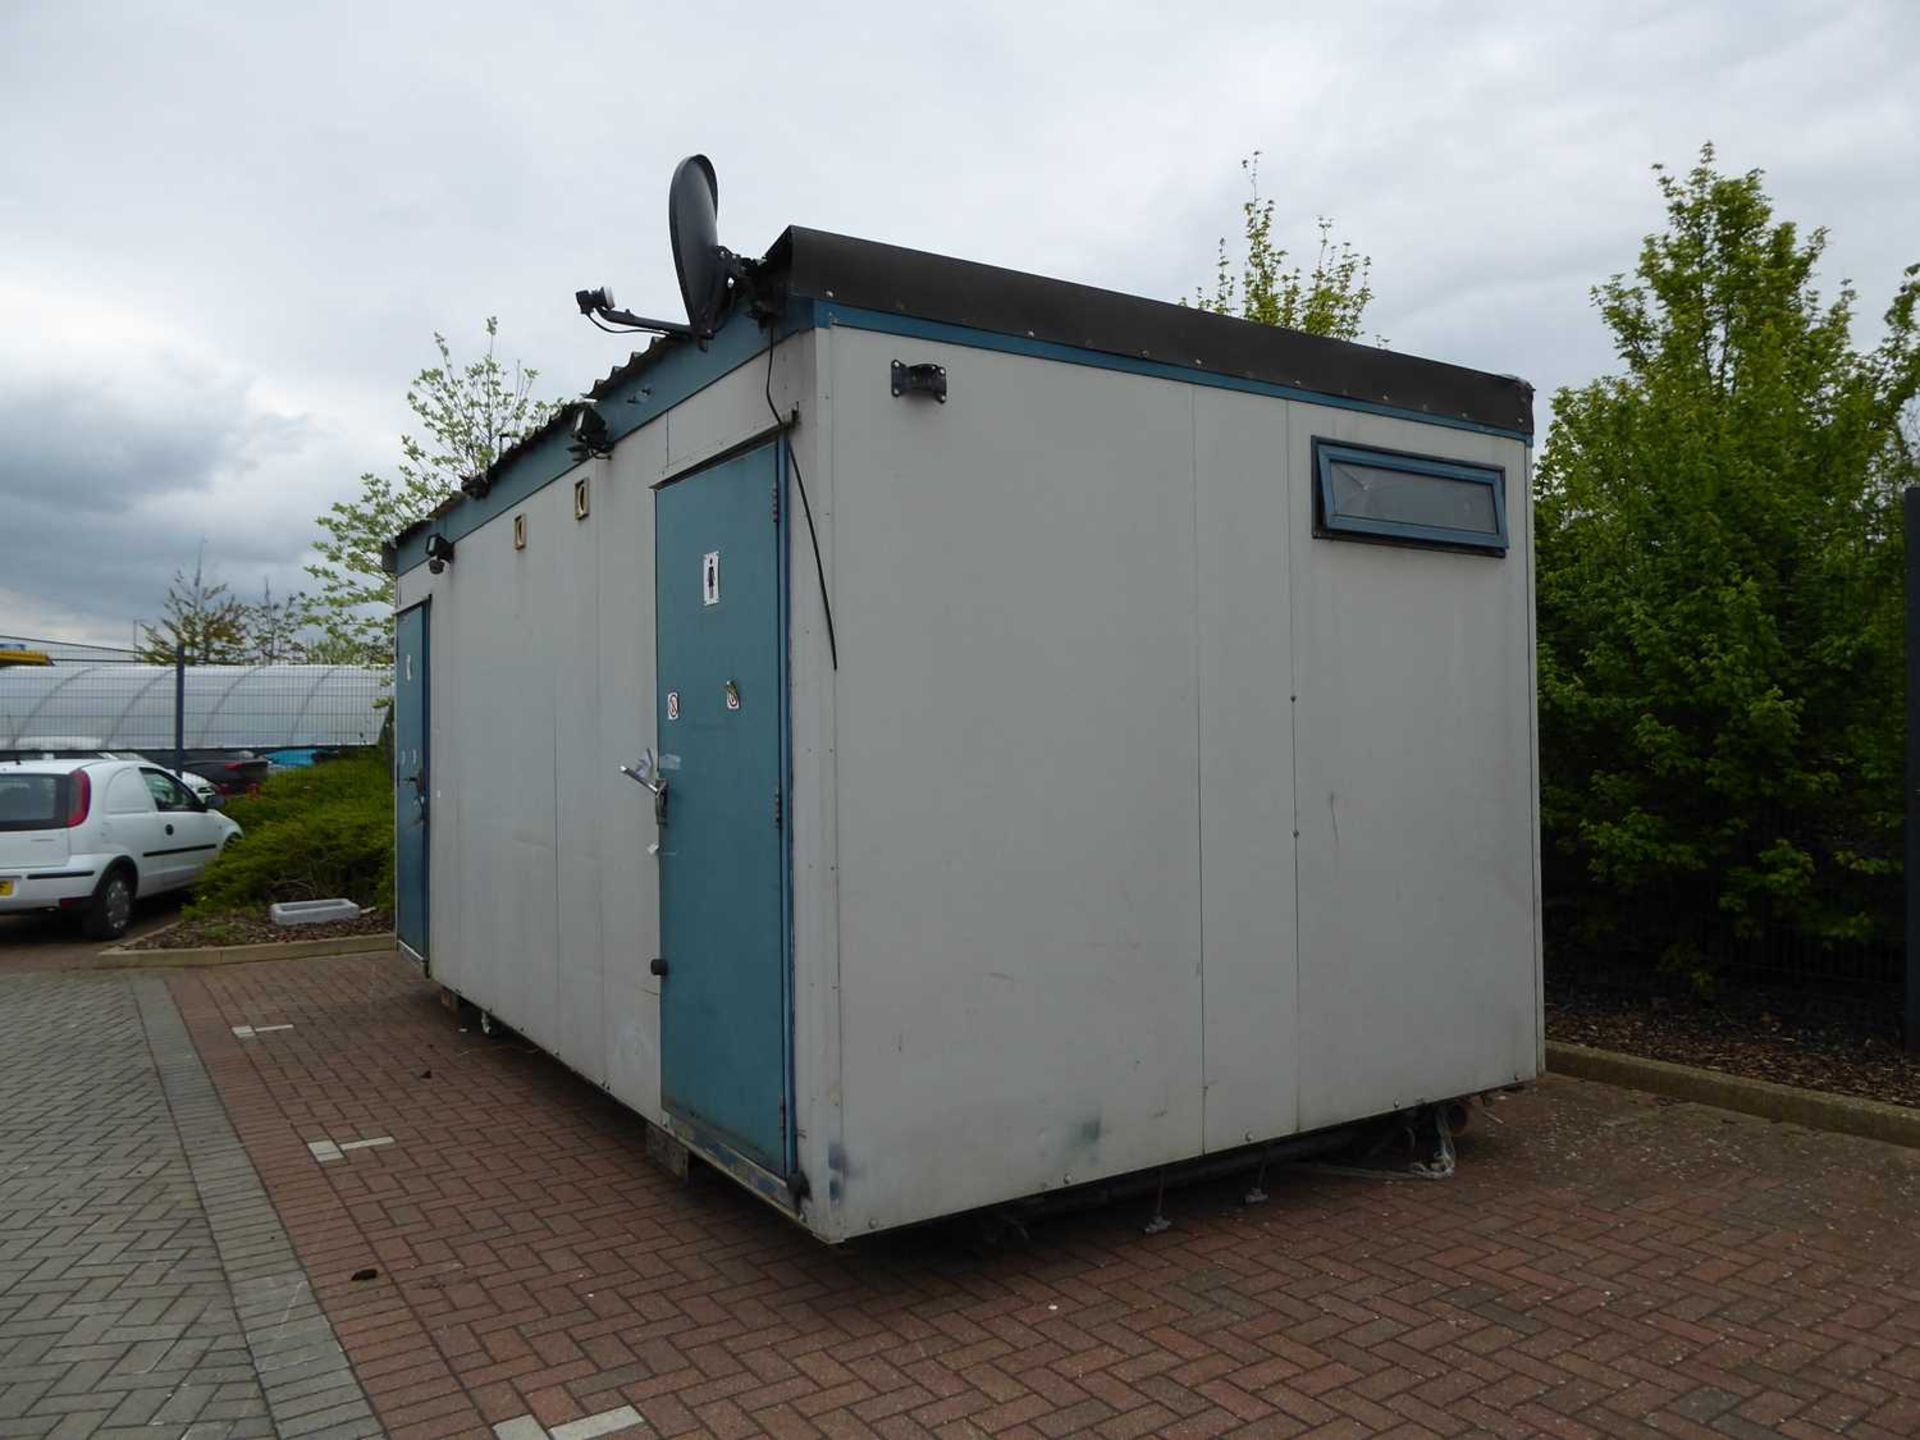 20ft x 9ft 6” metal clad portable toilet block comprising ladies and gents finished in blue and - Image 2 of 8